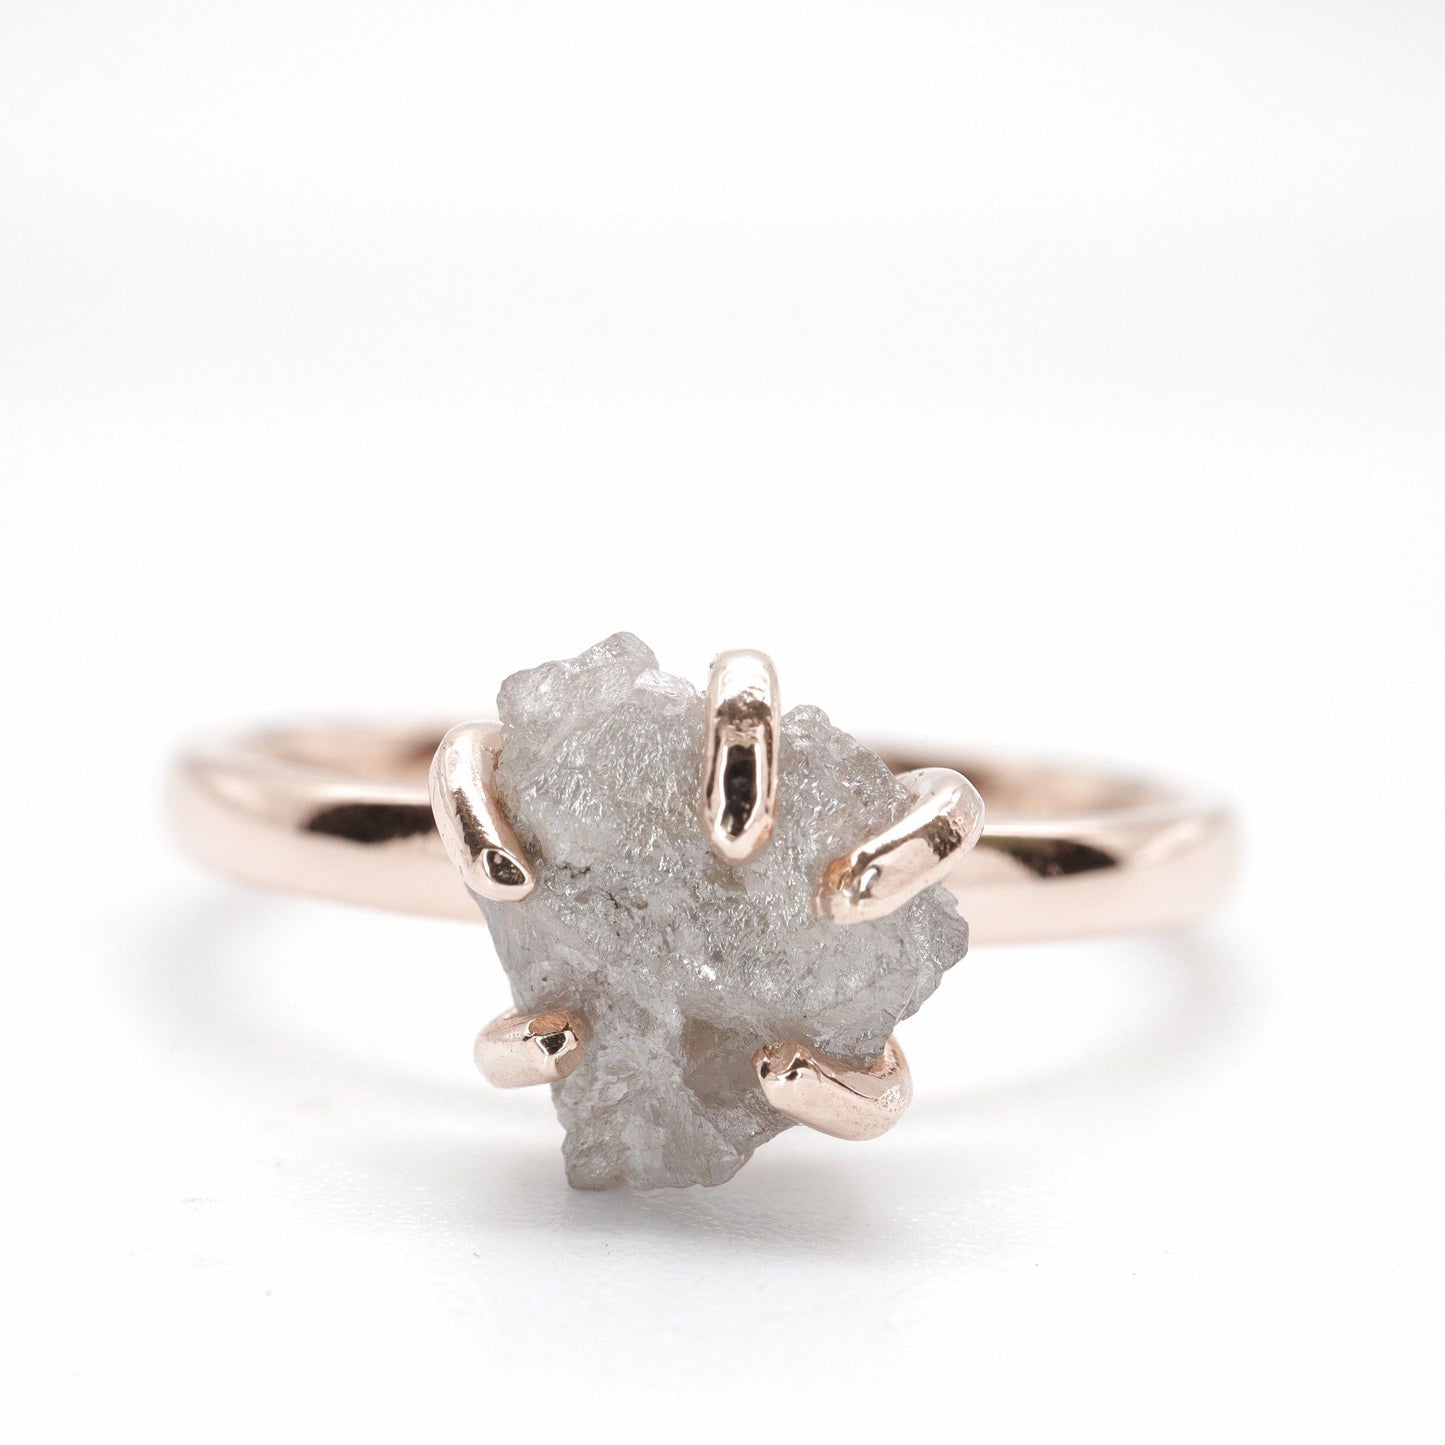 White uncut raw diamond solitaire rustic rose gold one carat ring.